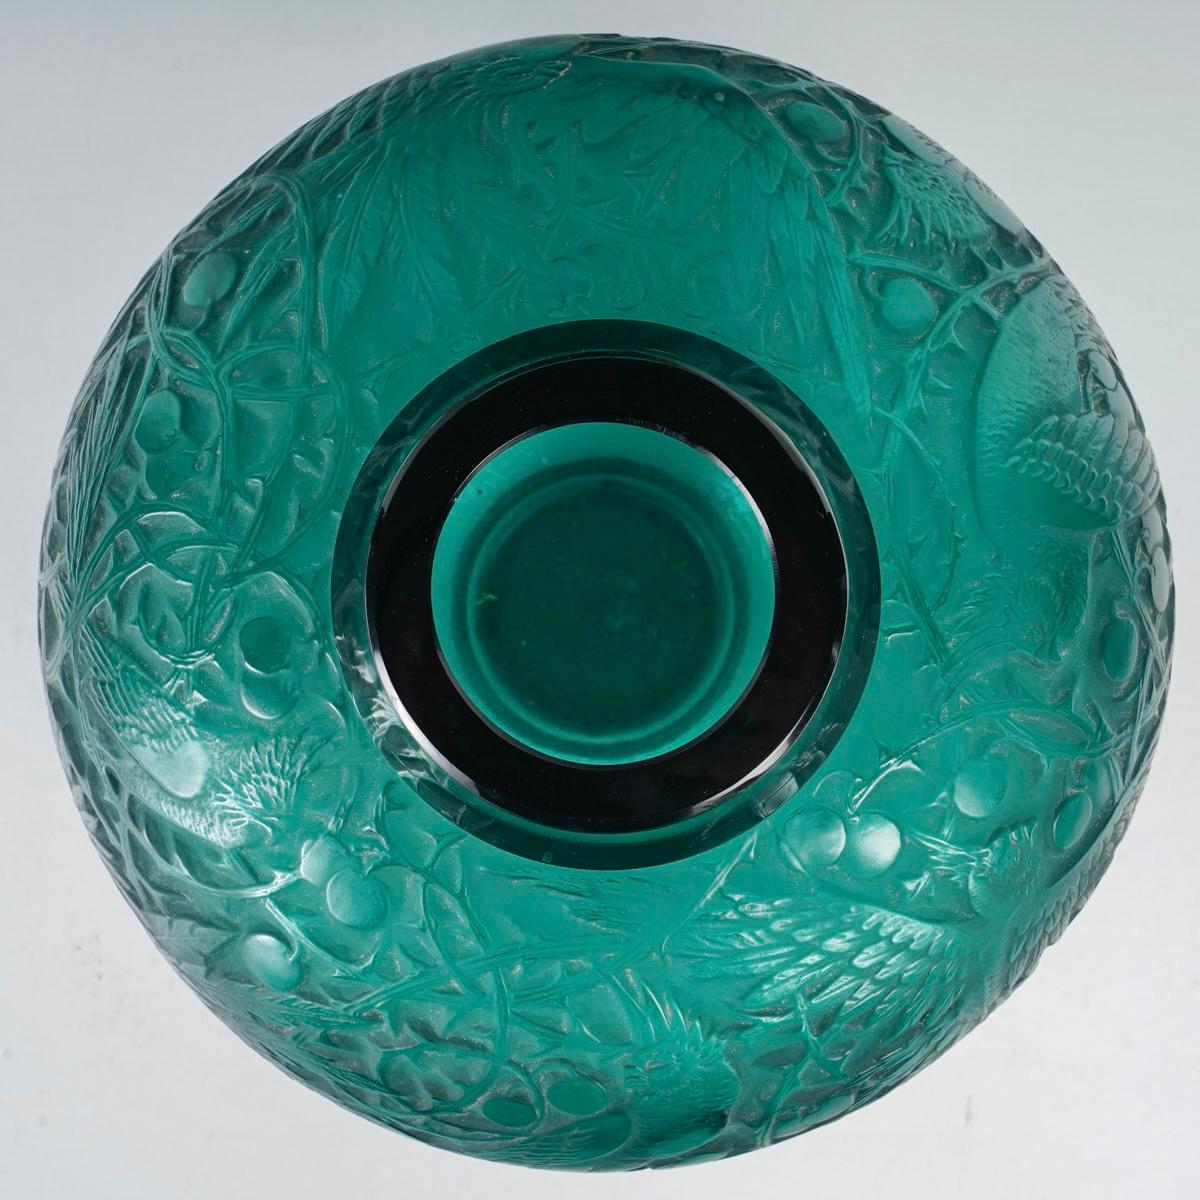 French 1924 René Lalique - Vase Aras Teal Green Glass With White Patina Parrots For Sale